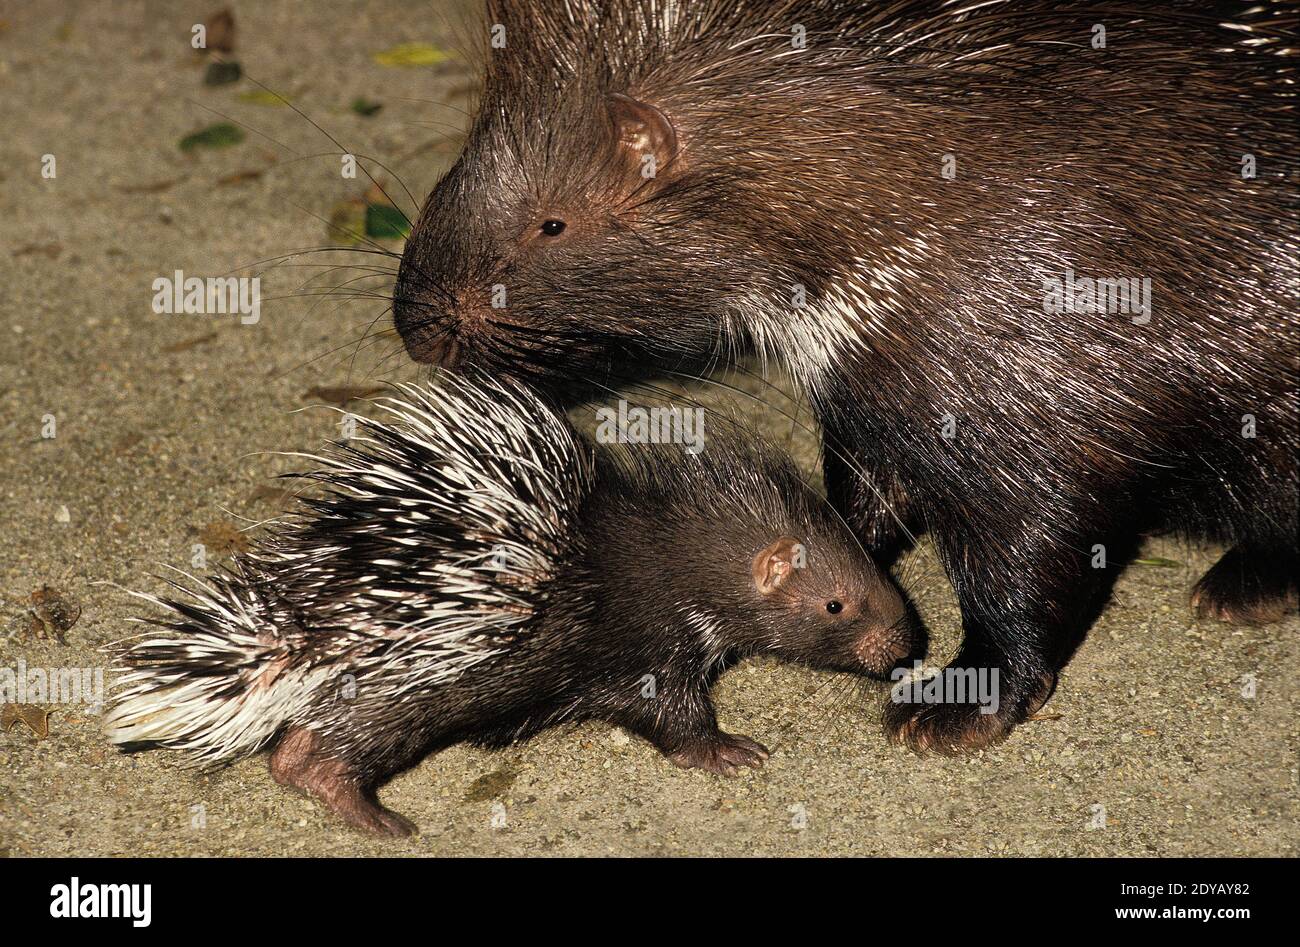 Crested Porcupine, hystrix cristata, Mother and Cub Stock Photo